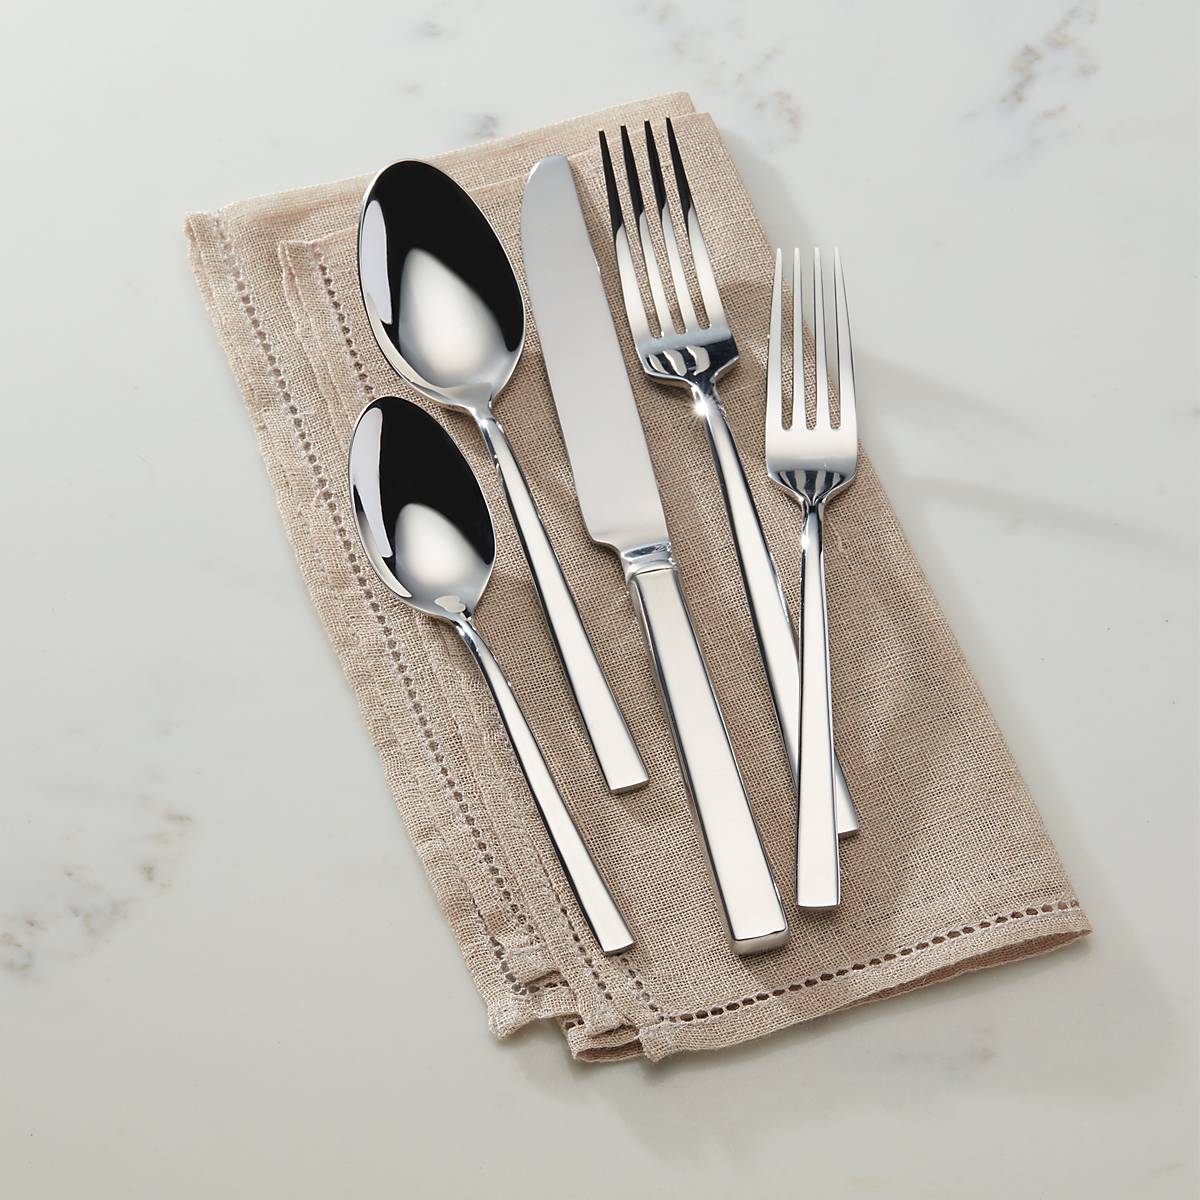 M MCIRCO Mirror Polished Stainless Steel Cutlery Set, 65-Piece